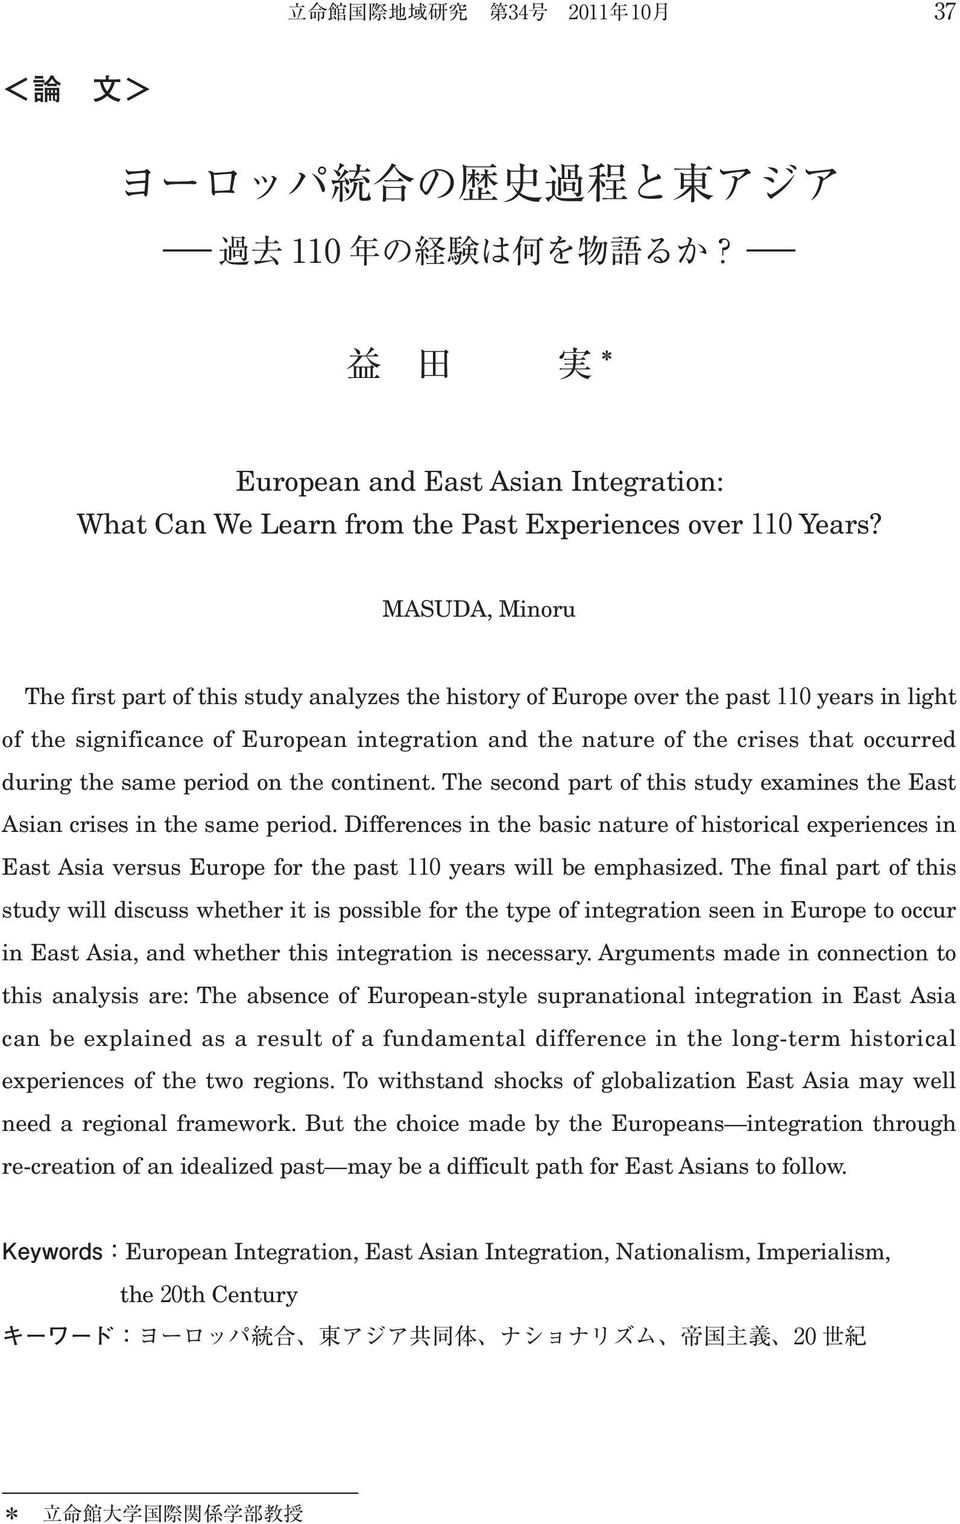 the same period on the continent. The second part of this study examines the East Asian crises in the same period.